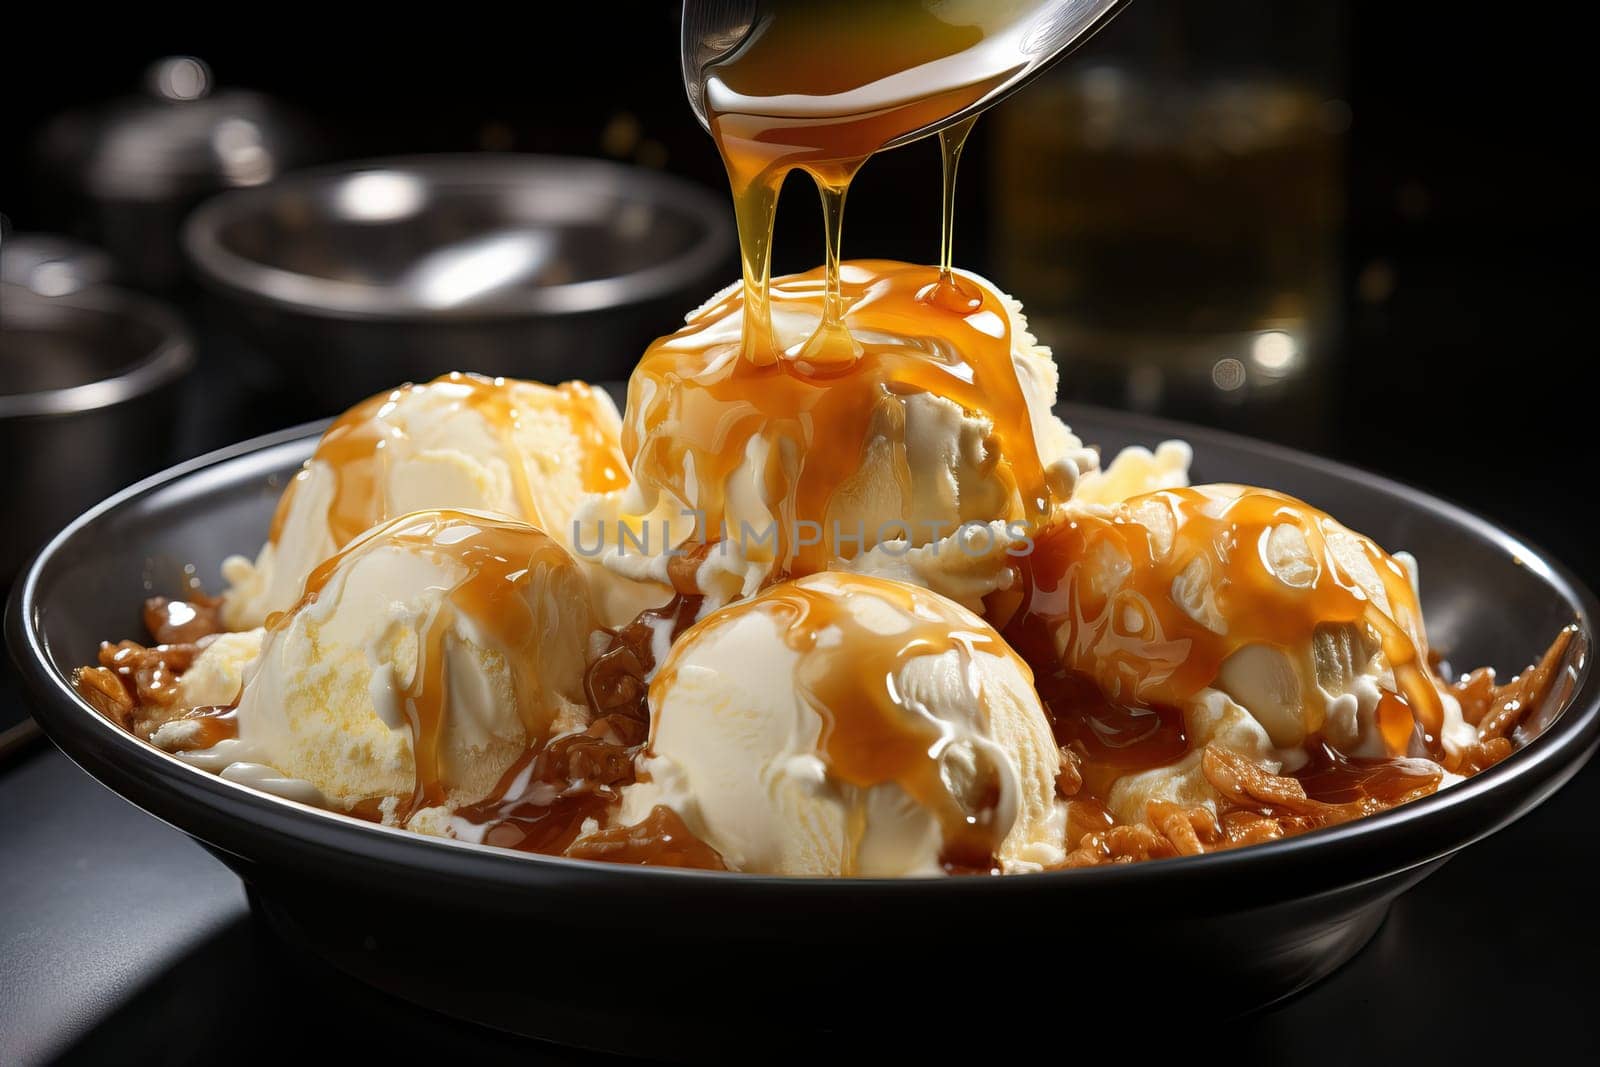 Vanilla ice cream scoops in a black bowl topped with caramel, large serving of ice cream close-up.